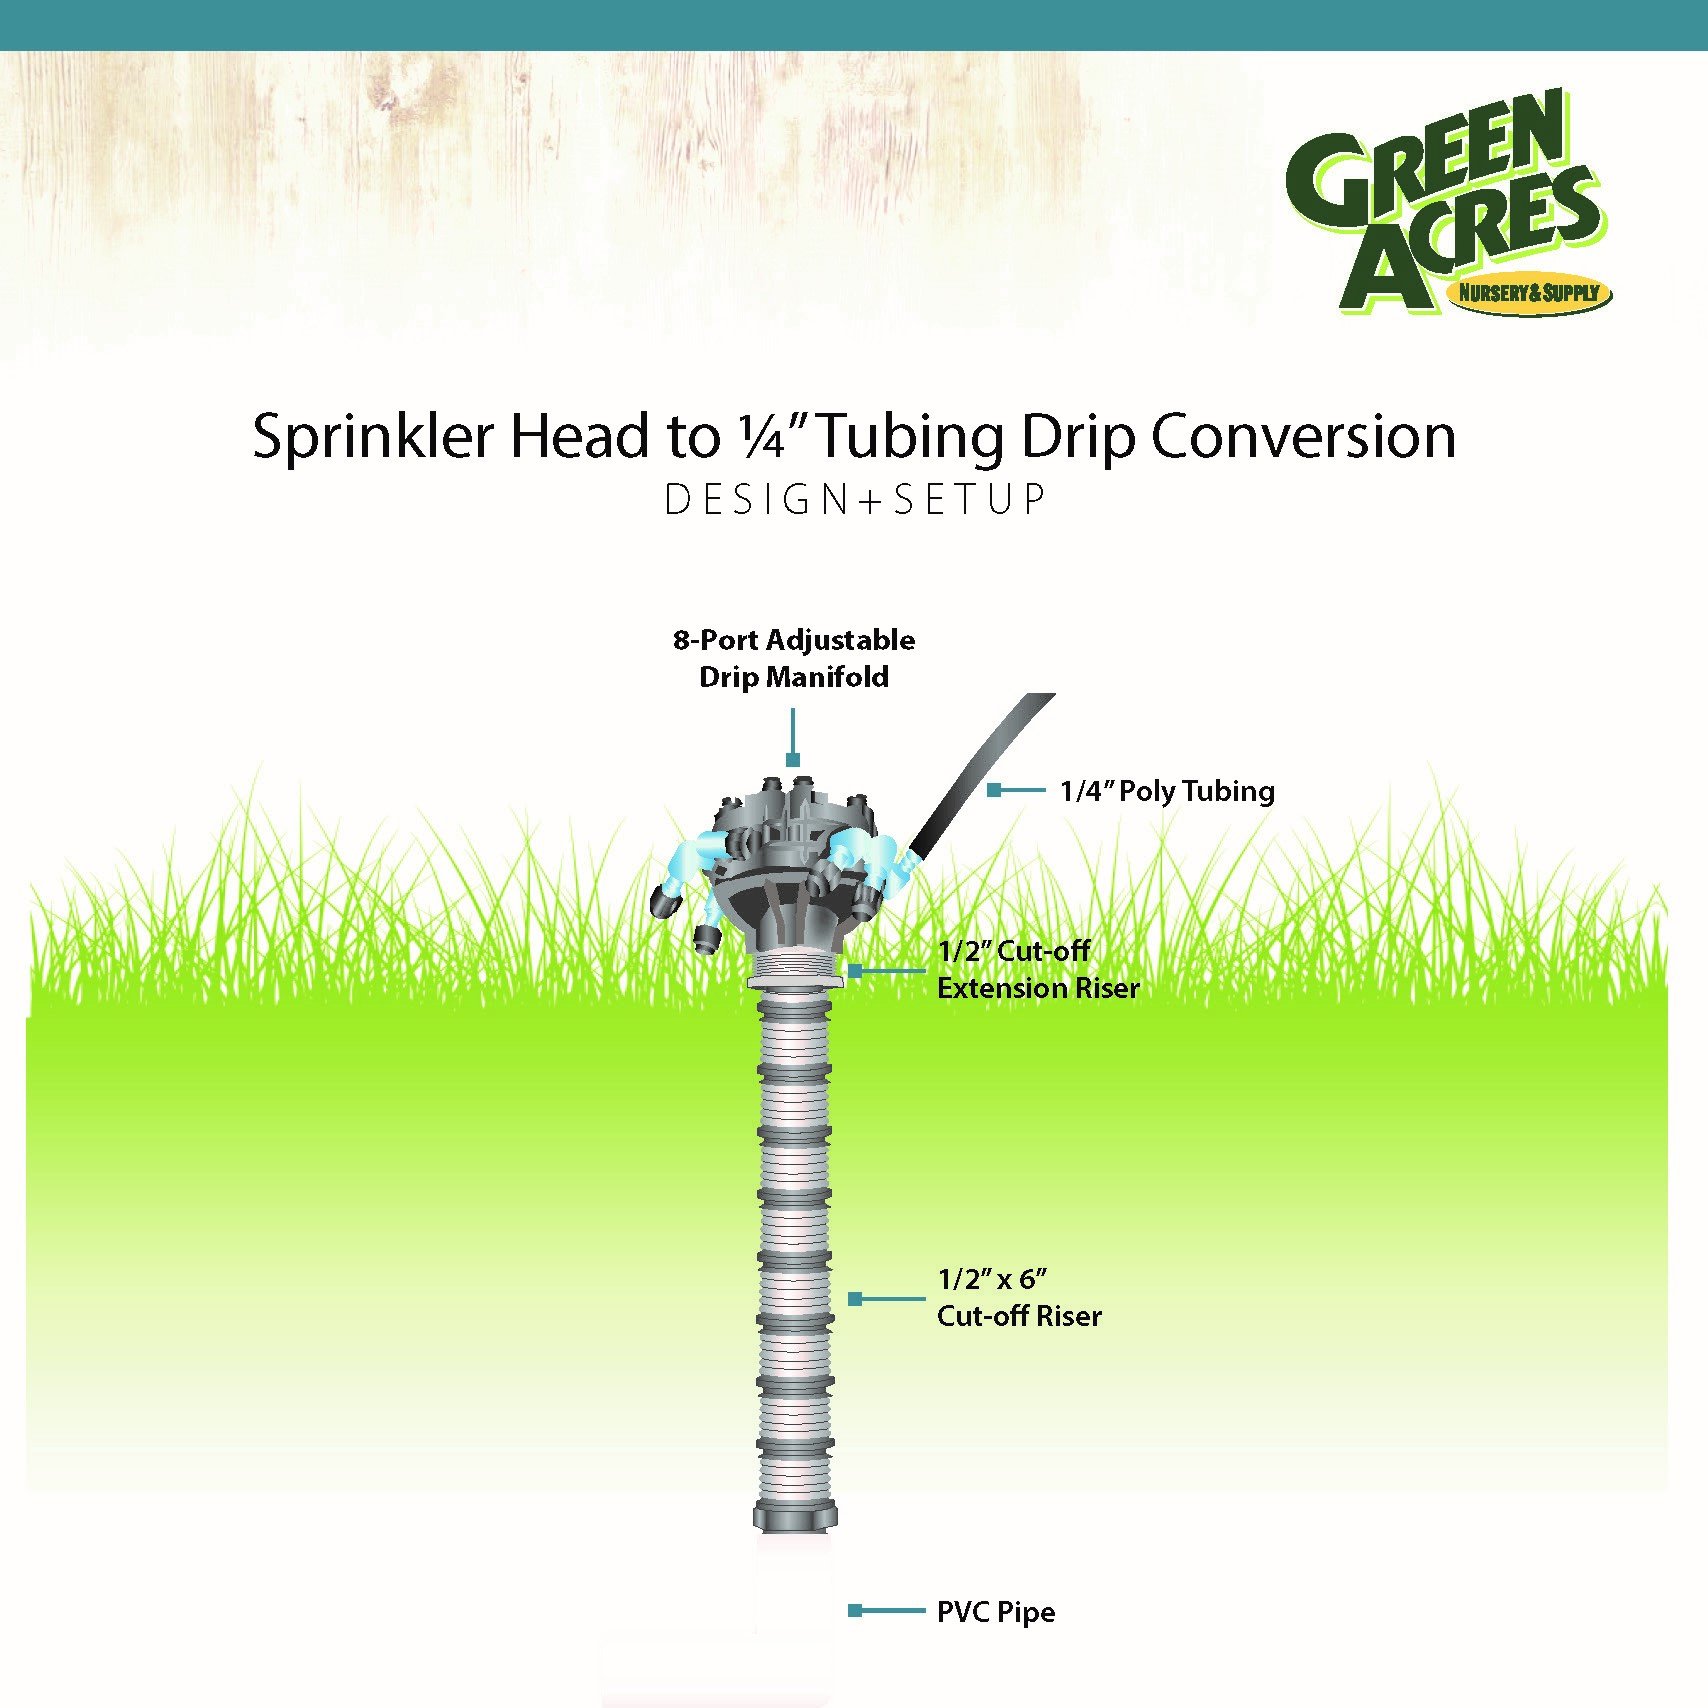 Diagram Sprinkler Head to one quarter inch Tubing Drip Conversion